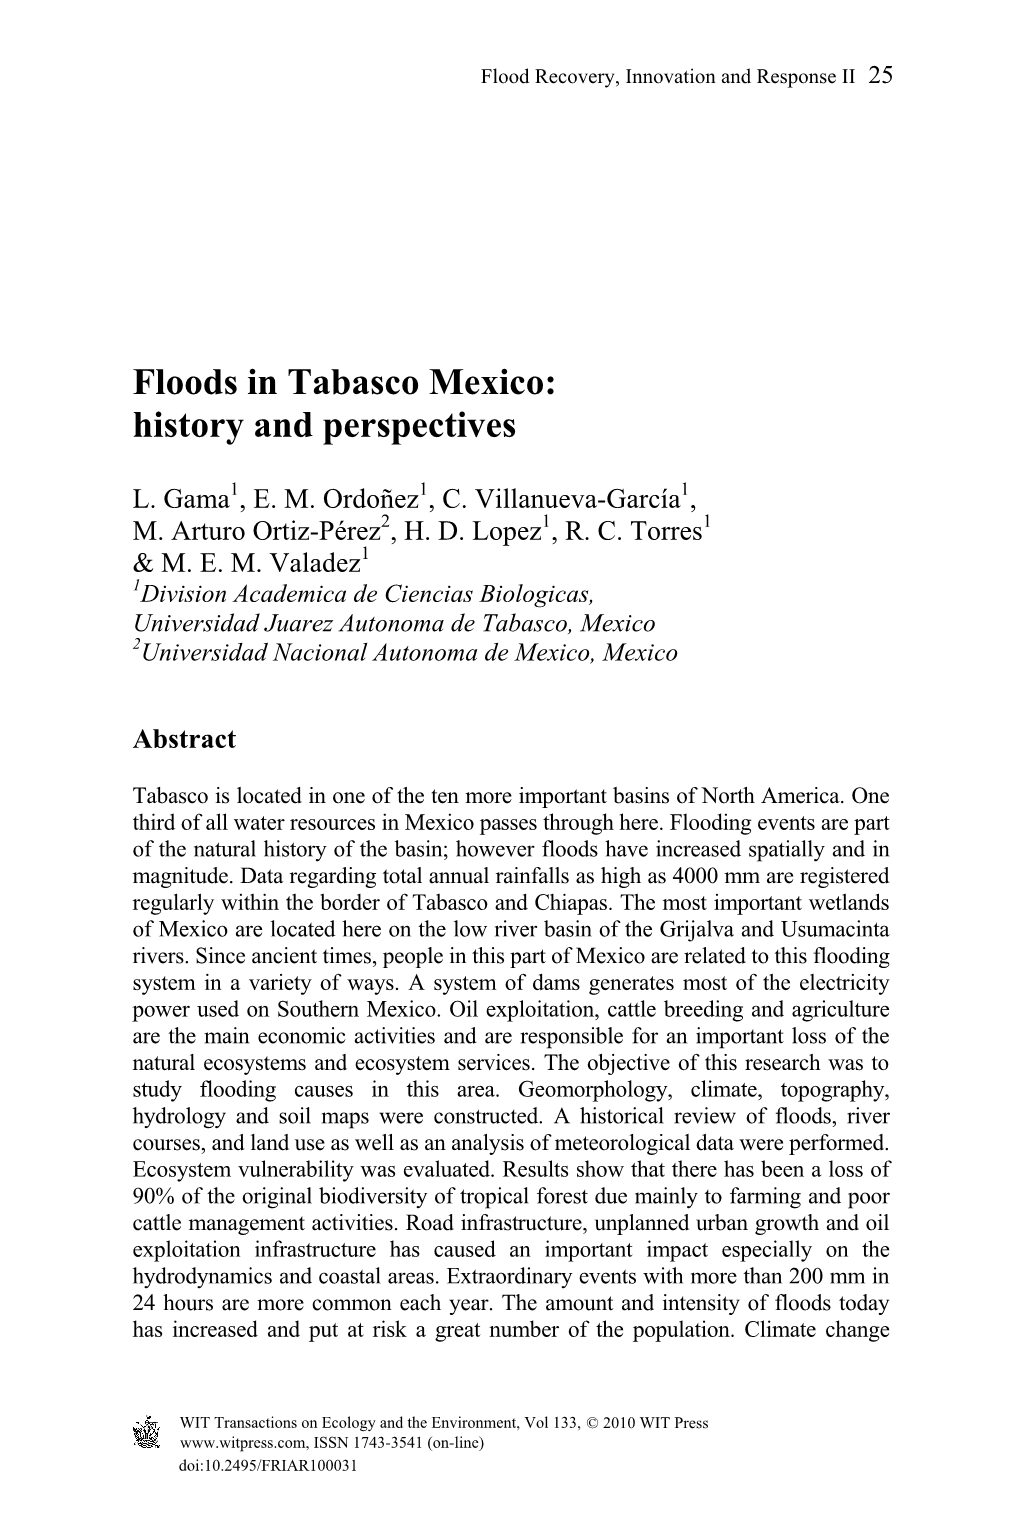 Floods in Tabasco Mexico History and Perspectives